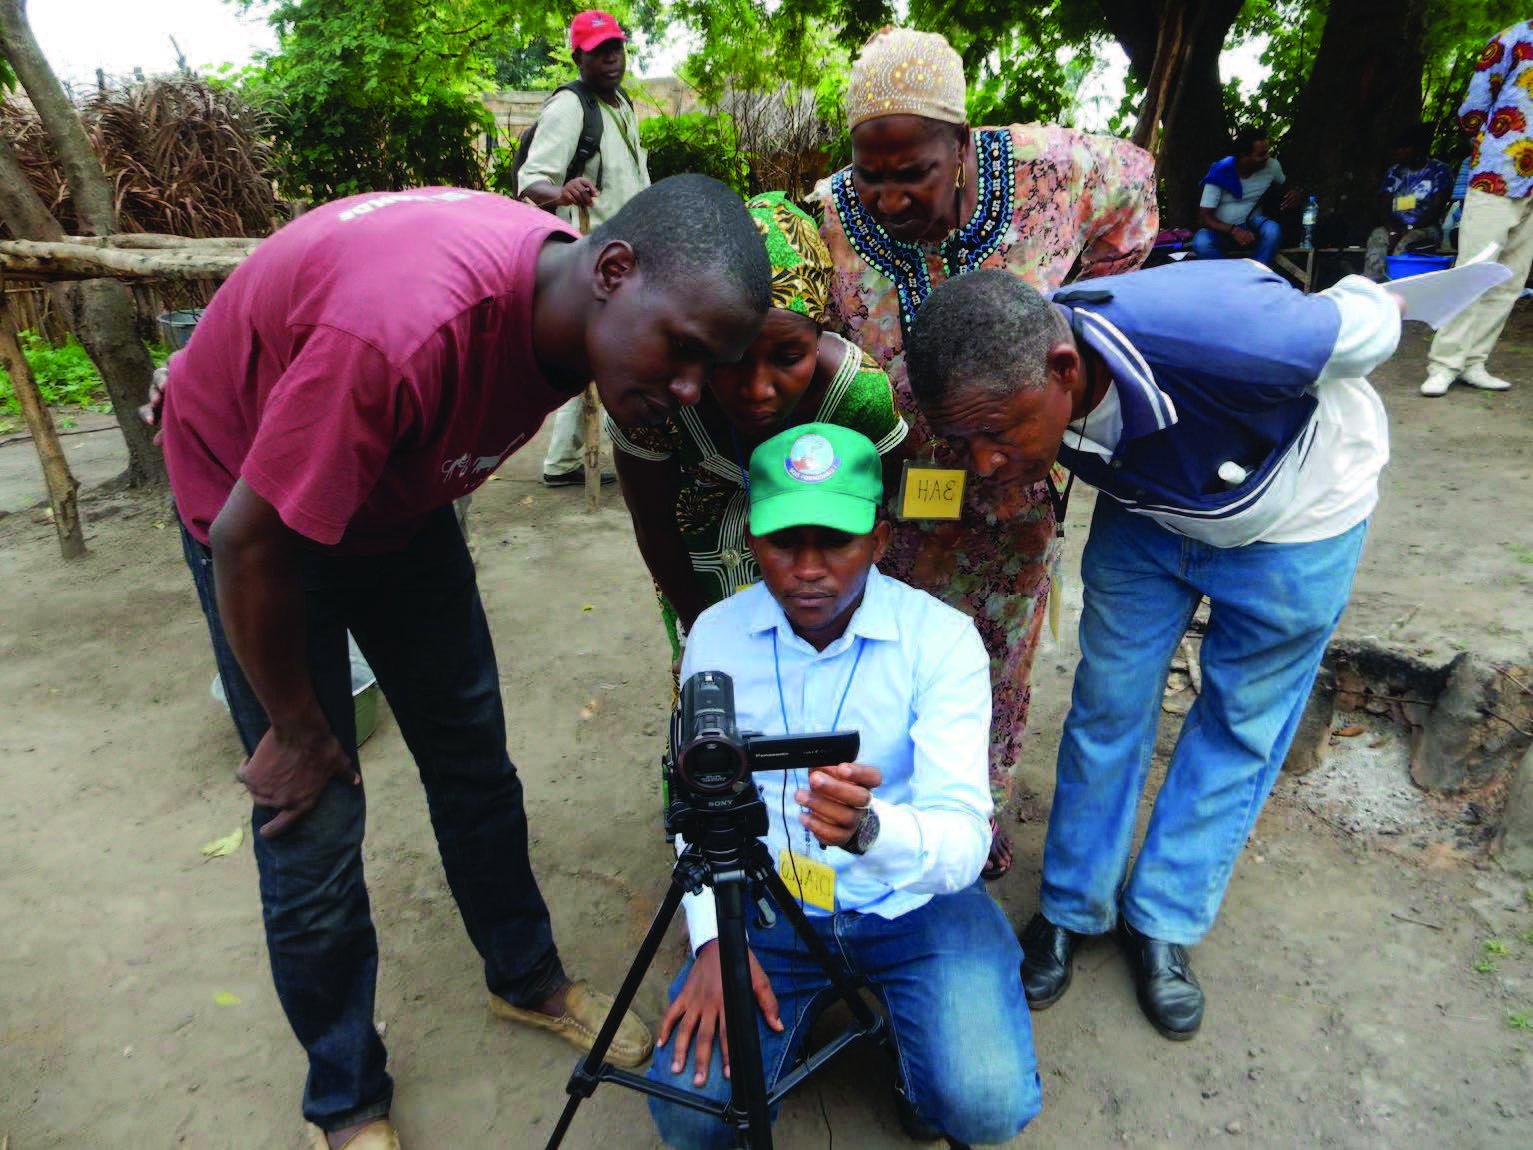 Photo of three men and two women looking at a camcorder as they work on a video. Caption: "SPRING/Guinea is adapting and testing the community video approach to promote nutritionspecific behaviors and nutrition-sensitive agriculture practices. For more on our work in Guinea, please visit: www.spring-nutrition.org/countries/guinea."